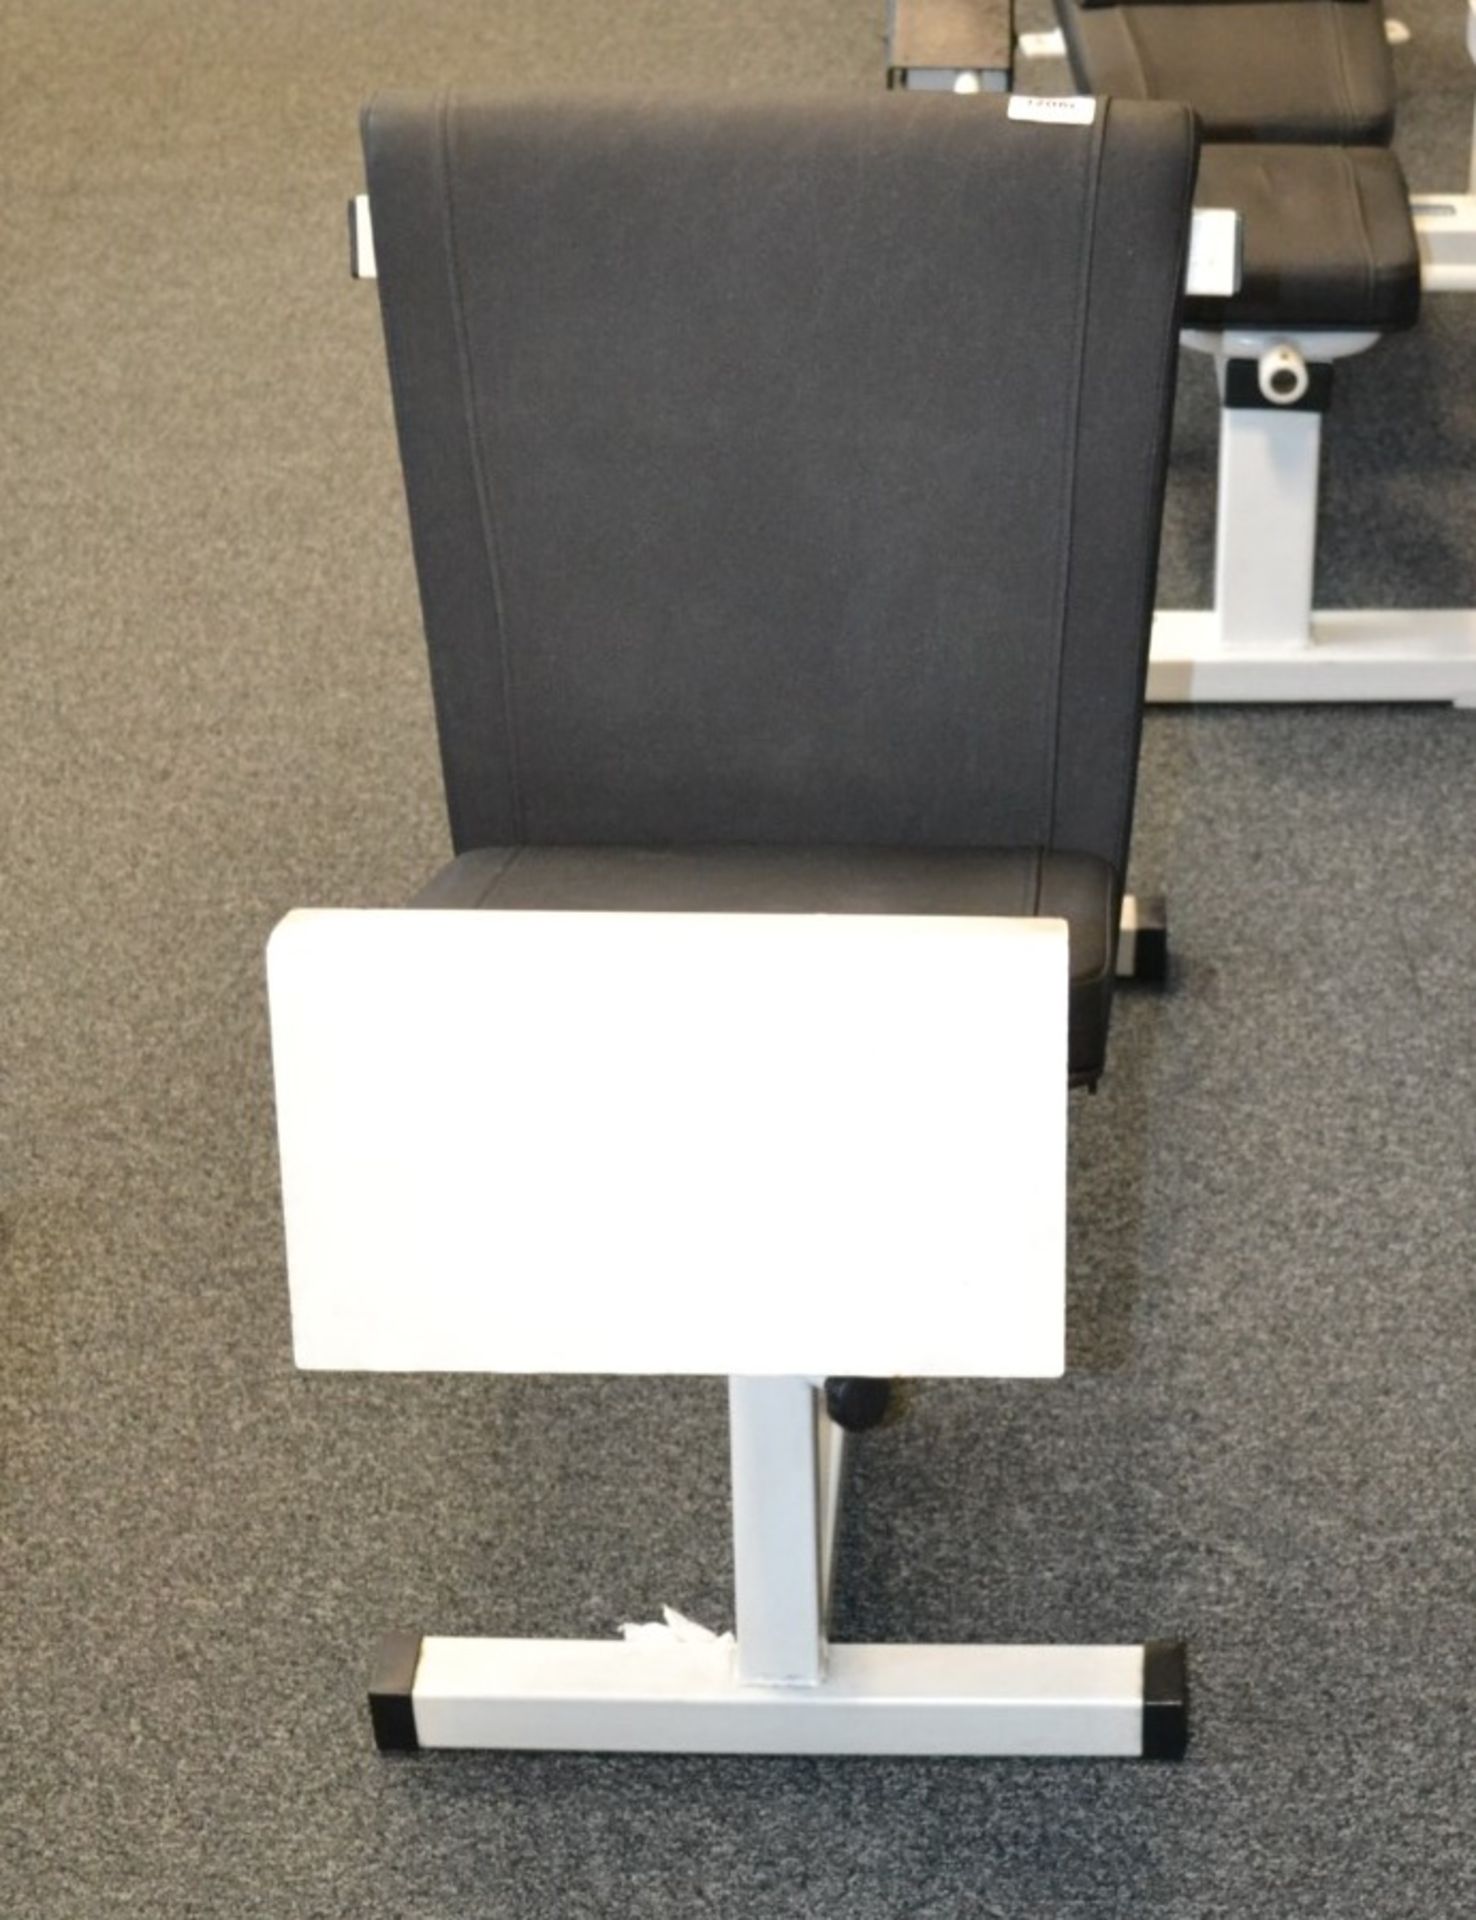 1 x Dr.Wolff Lumbal 307 Fitness Bench - Dimensions: L110 x H90 x W55cm - Ref: J2066/1FG - CL356 - - Image 2 of 2